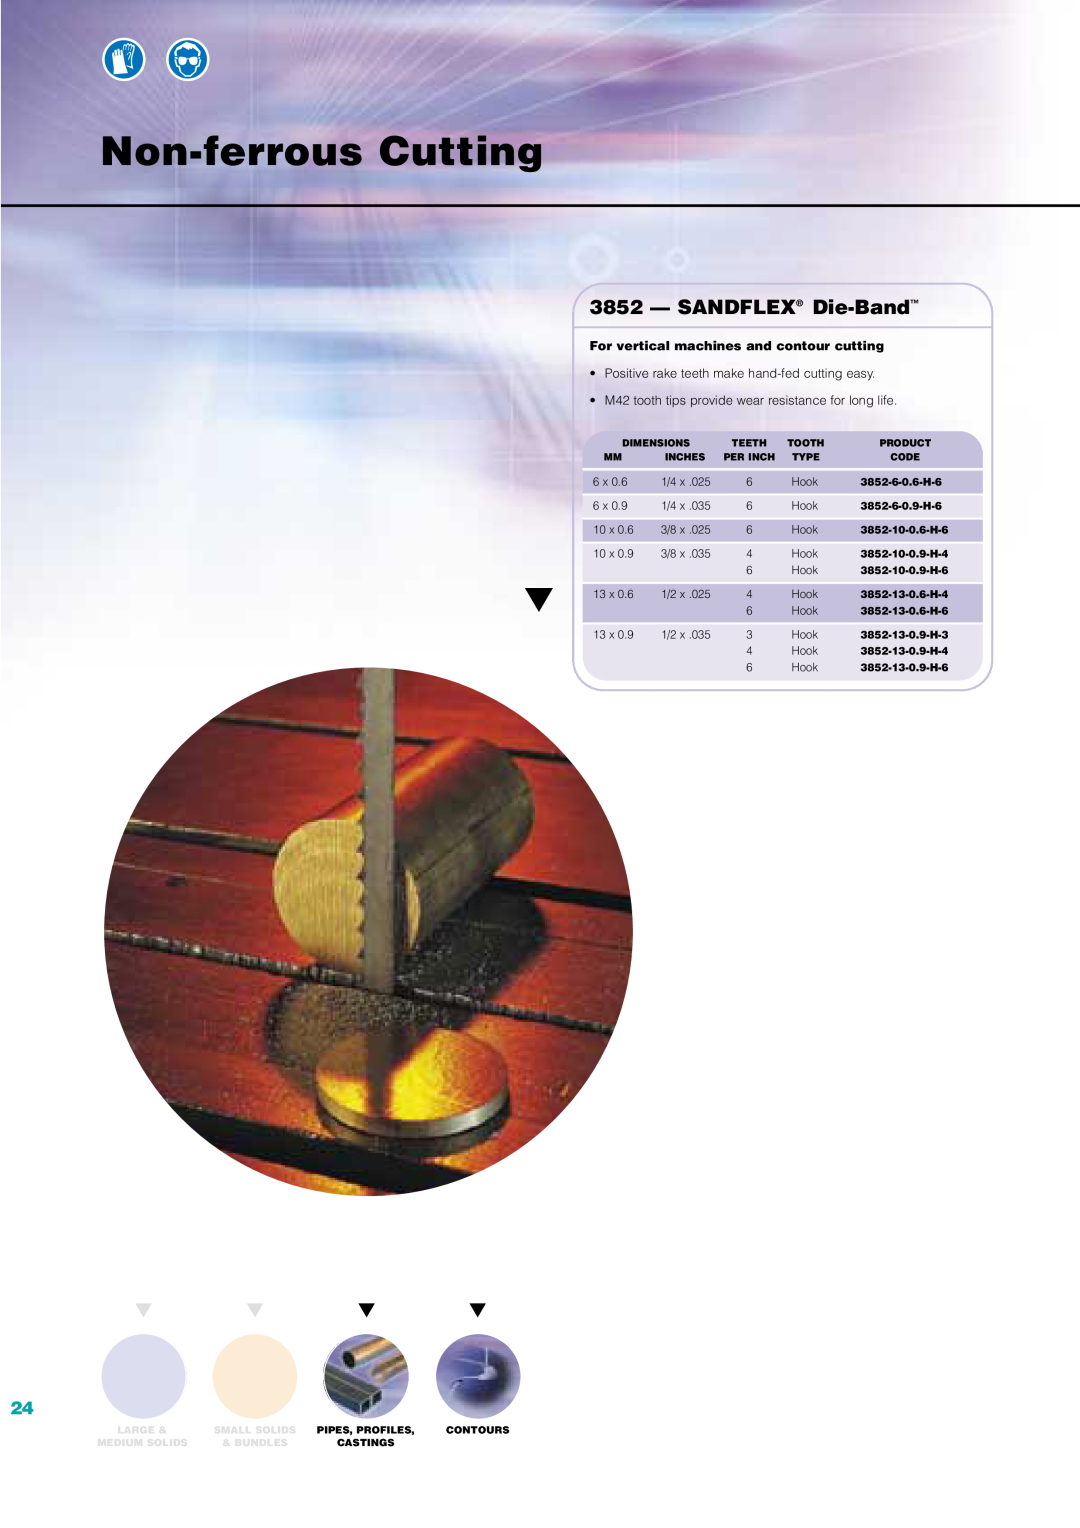 Bahco Saw manual Non-ferrous Cutting, SANDFLEX Die-Band, For vertical machines and contour cutting 